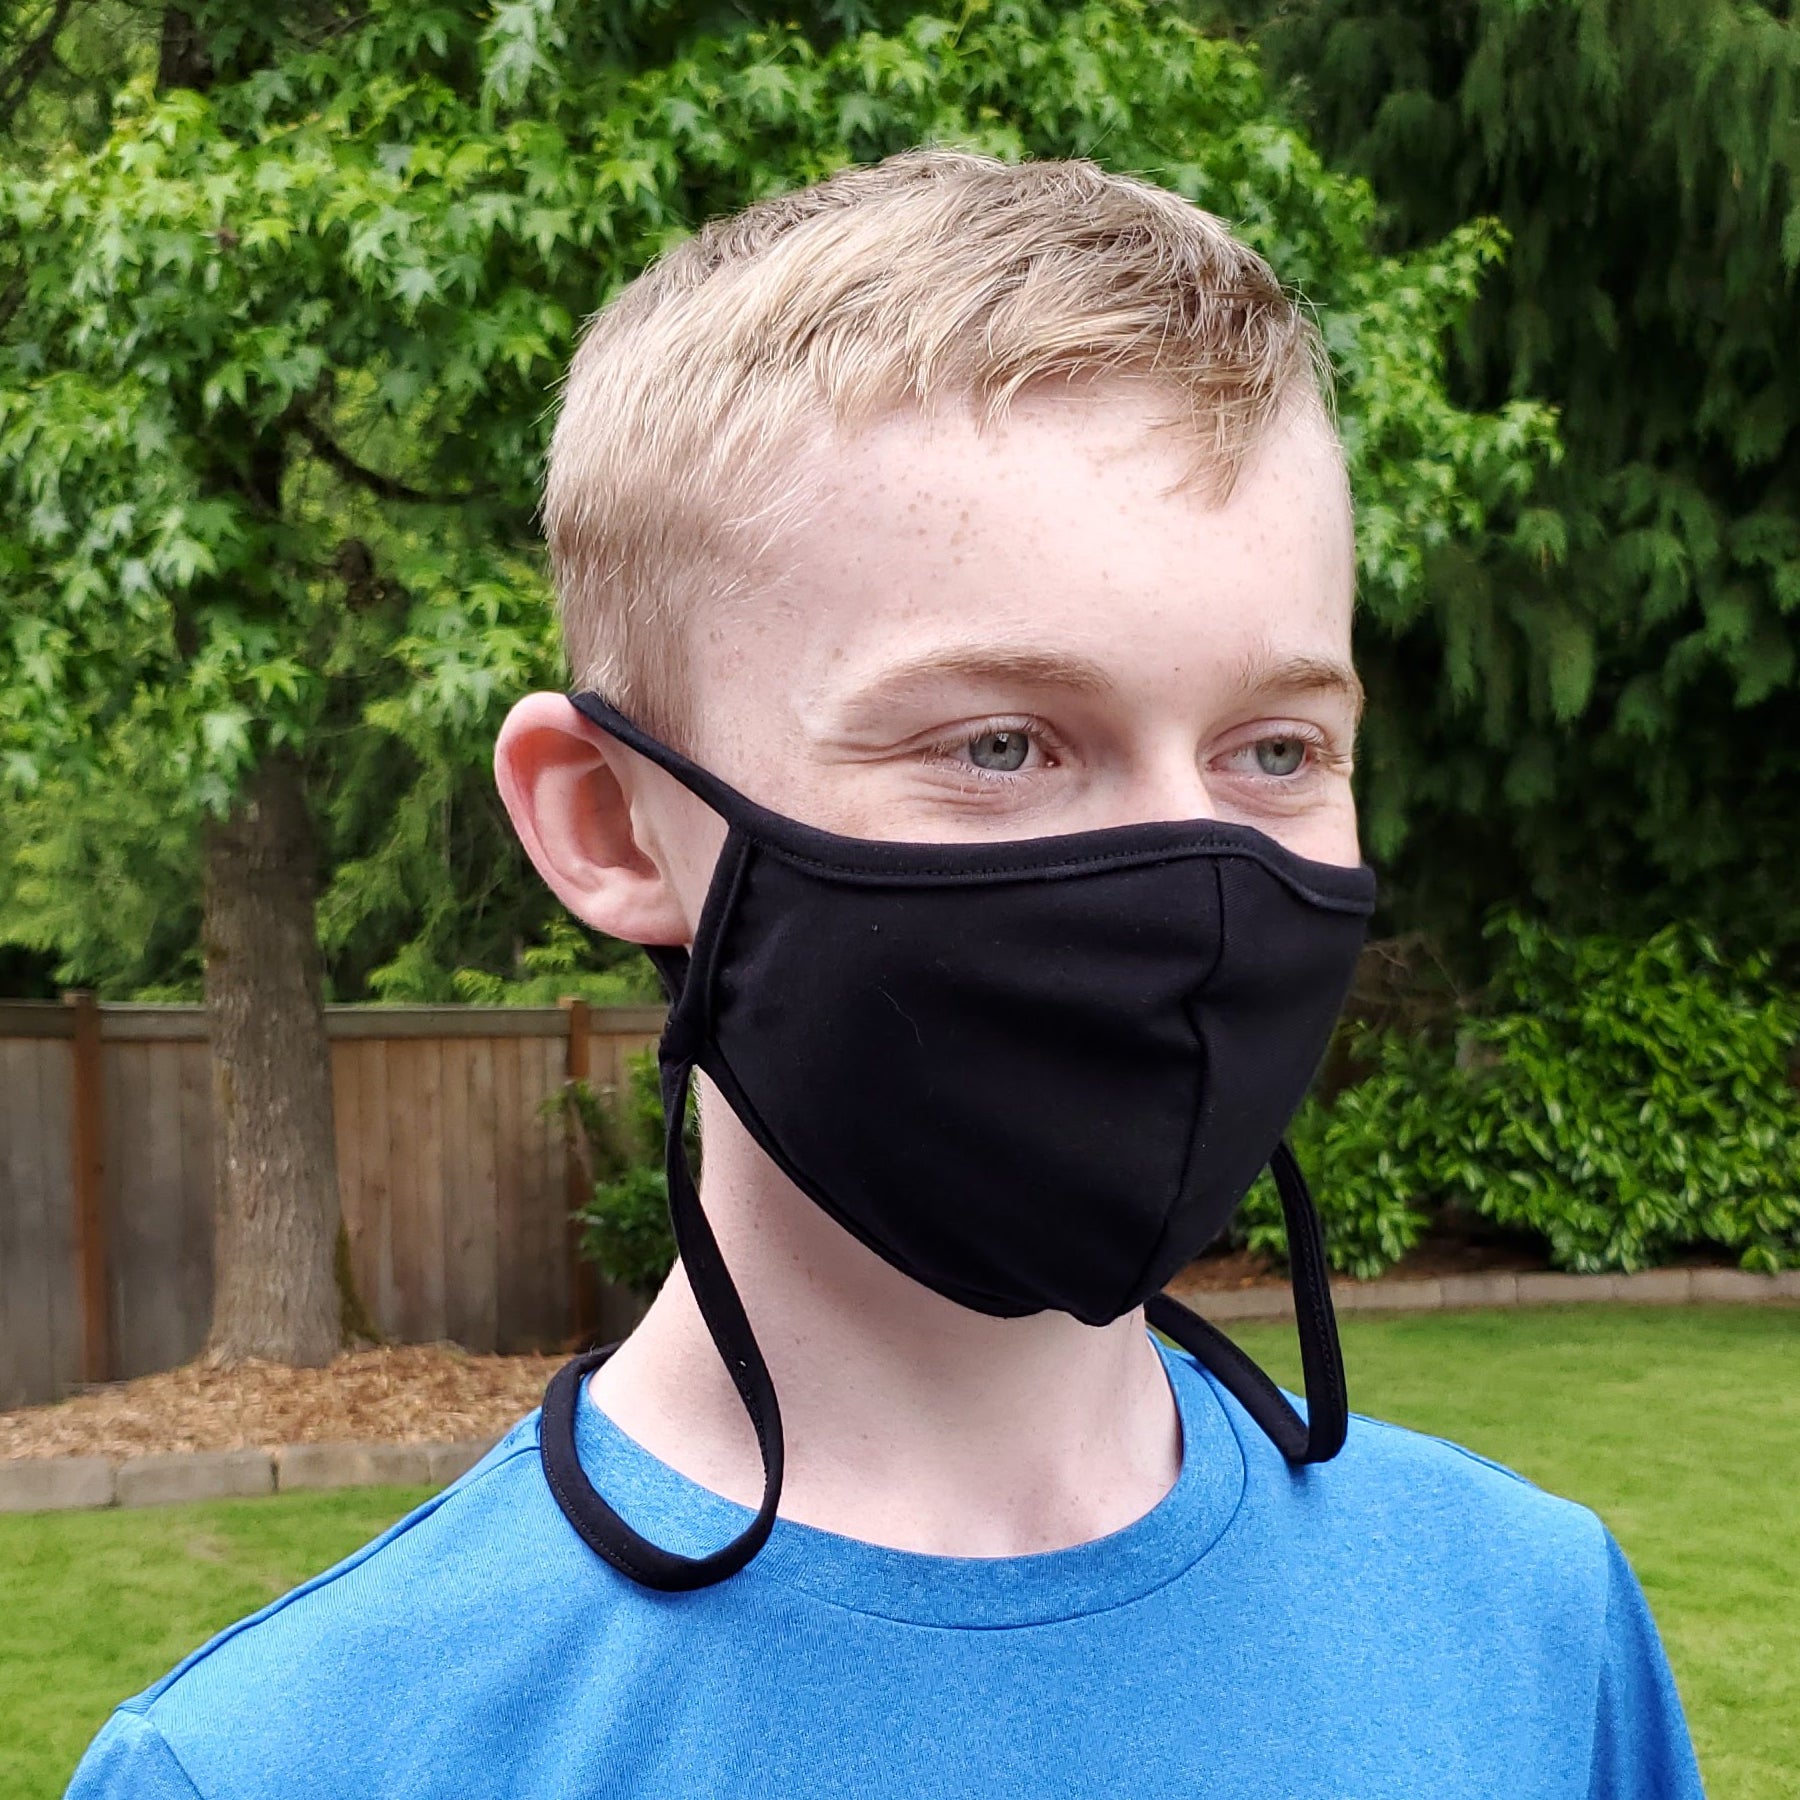  Lawn Mowing Mask